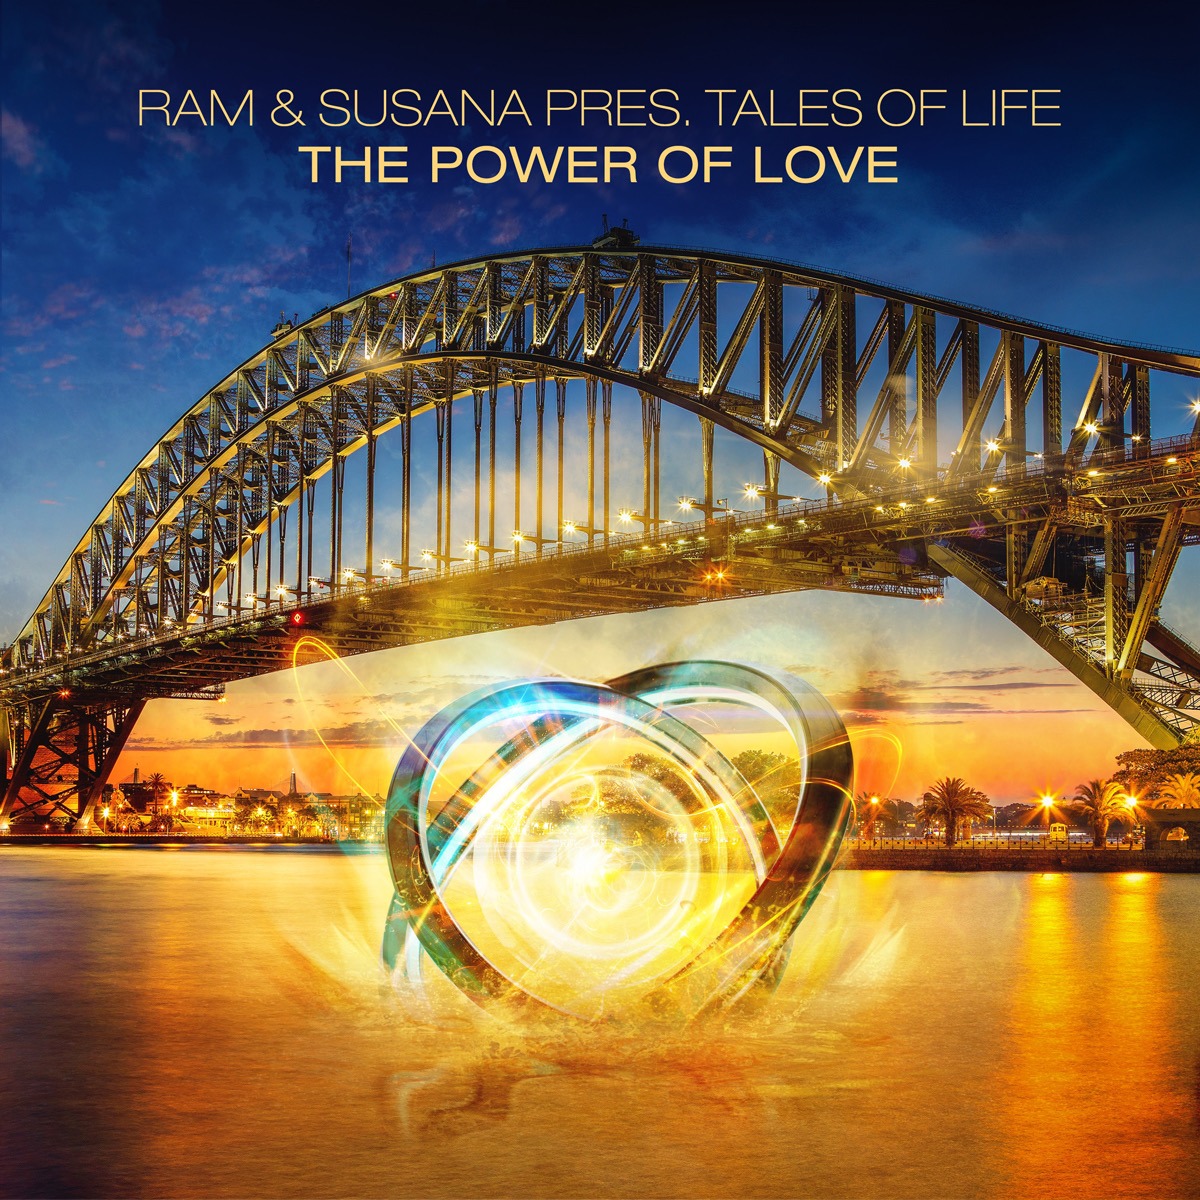 RAM & SUSANA present TALES OF LIFE – “THE POWER OF LOVE”